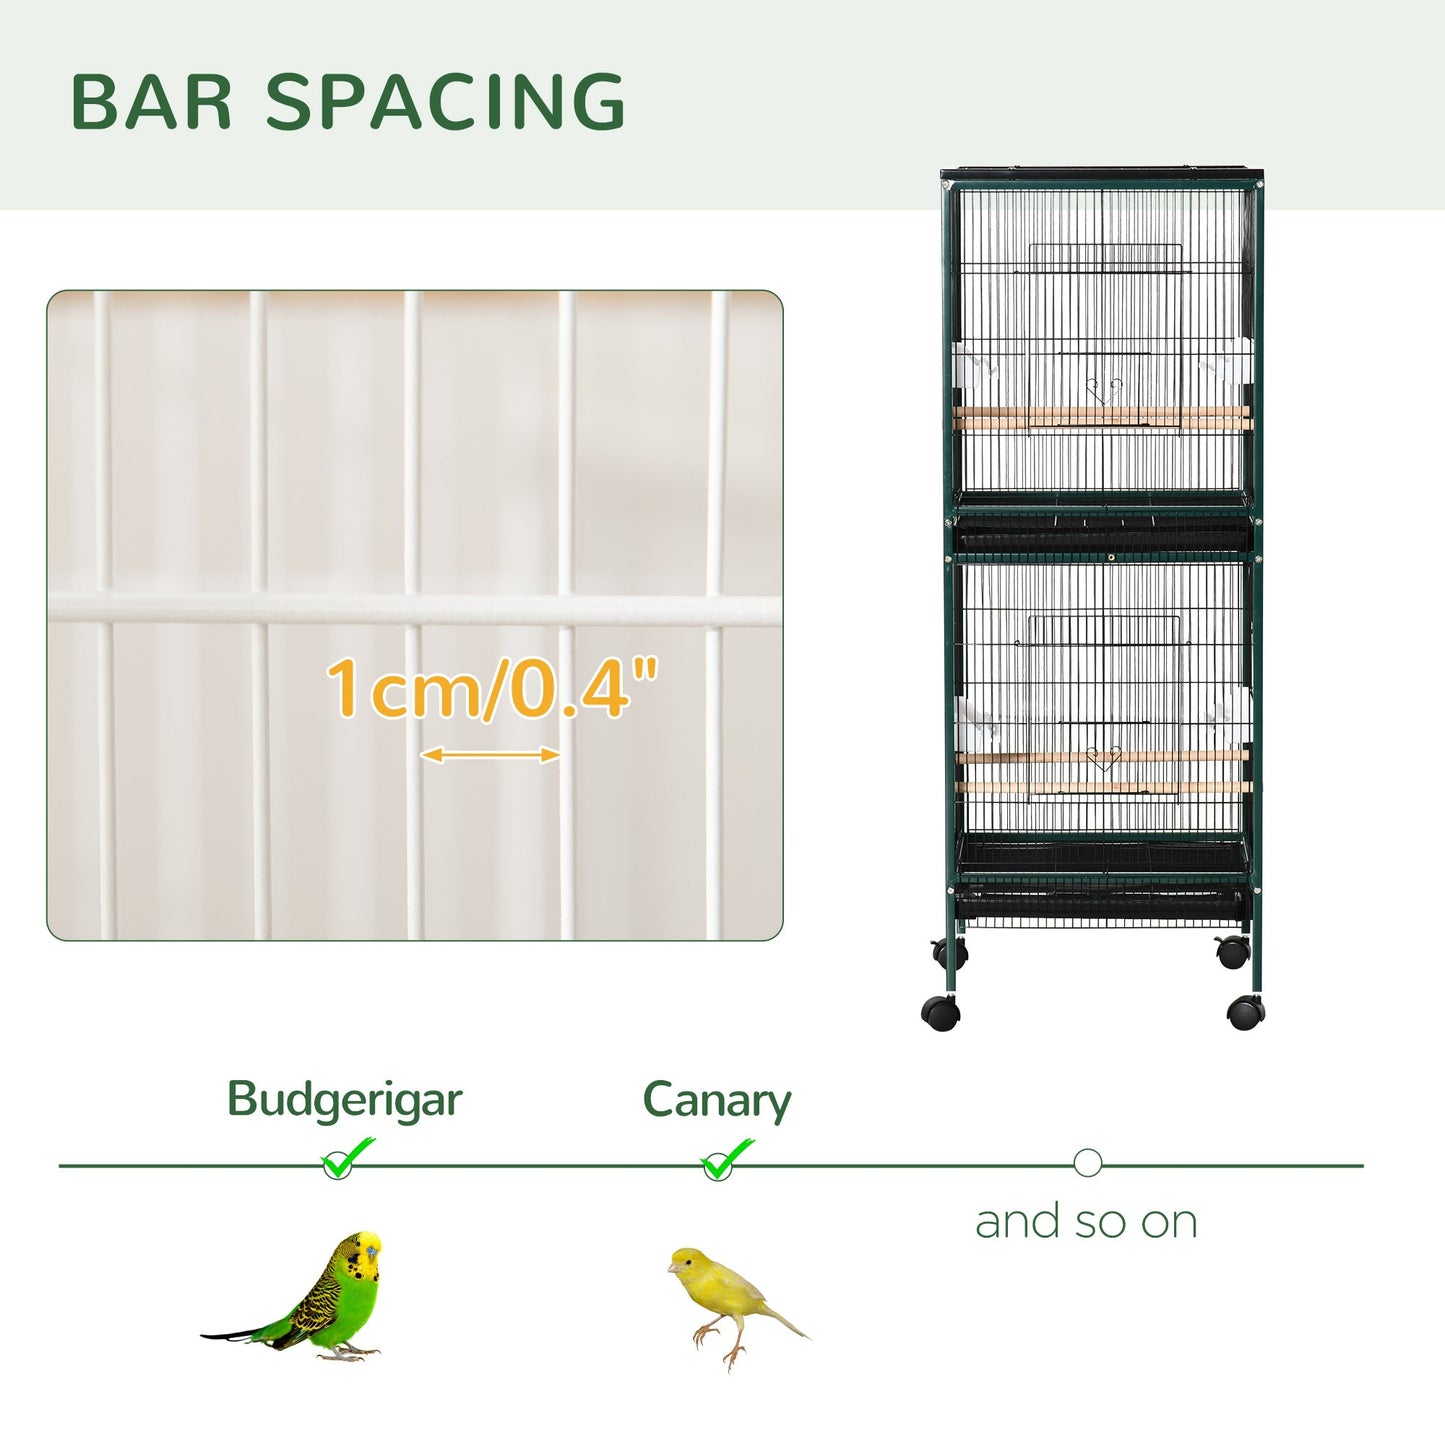 55.1" 2 In 1 Bird Cage Aviary Parakeet House for finches, budgies with Wheels, Slide-out Trays, Wood Perch, Green at Gallery Canada